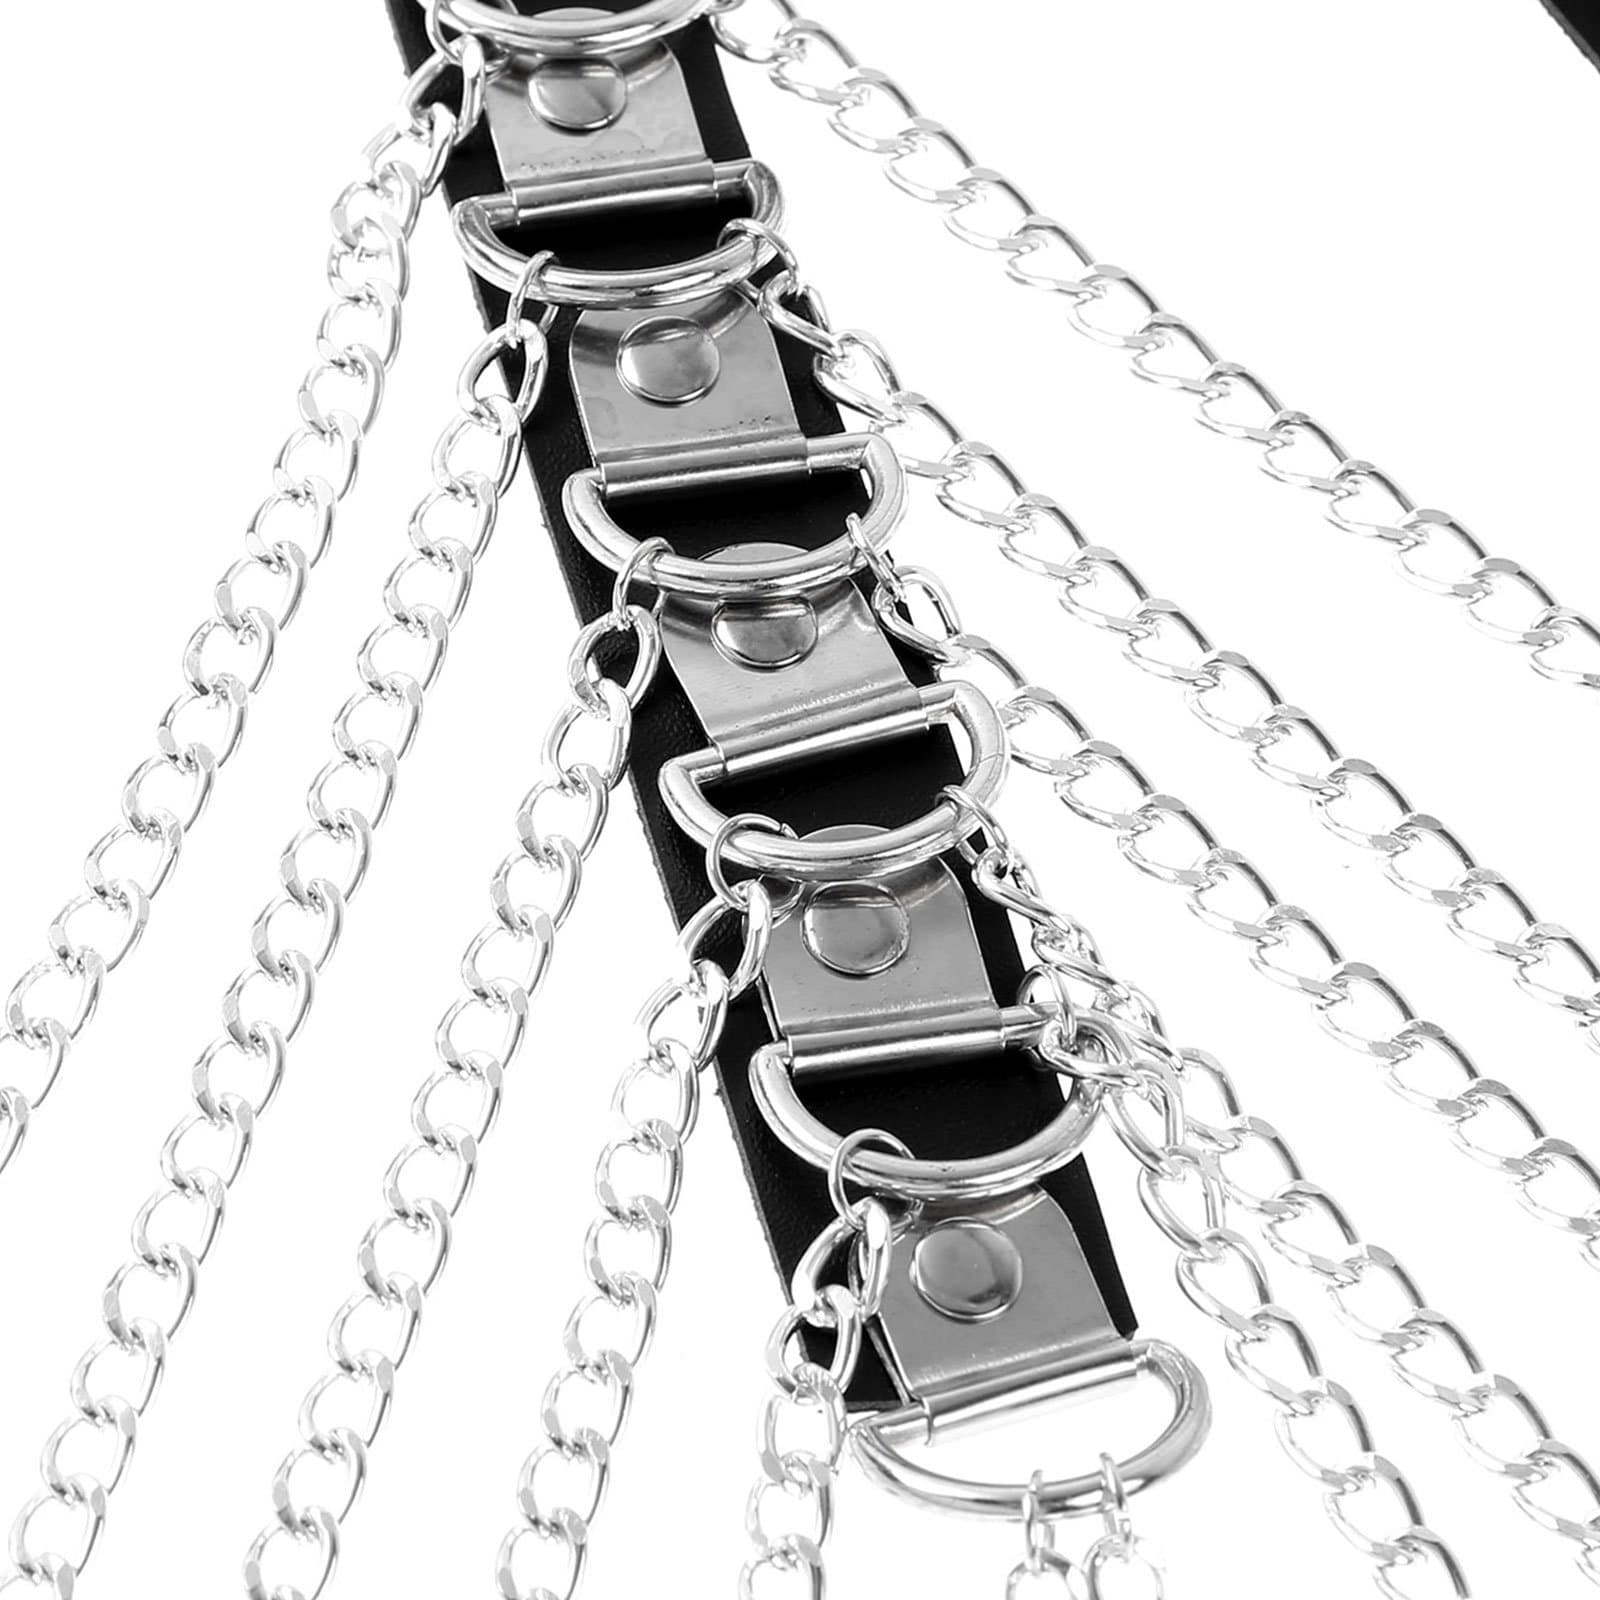 Kinky Cloth 200000298 Mens Metal Chain Leather Chest Harness